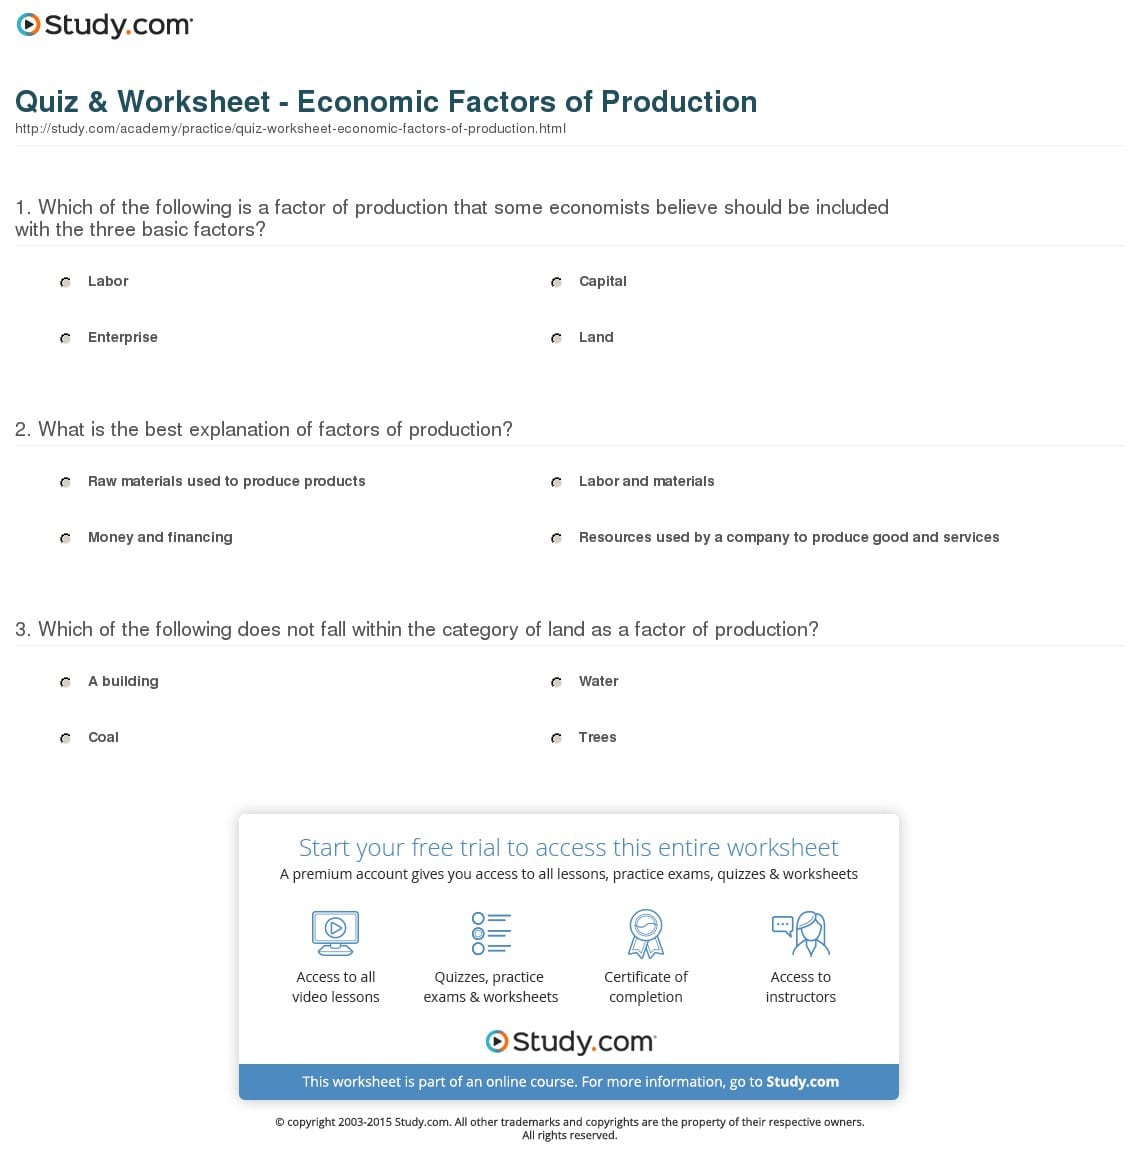 Factors Of Production Worksheet Answers db excel com